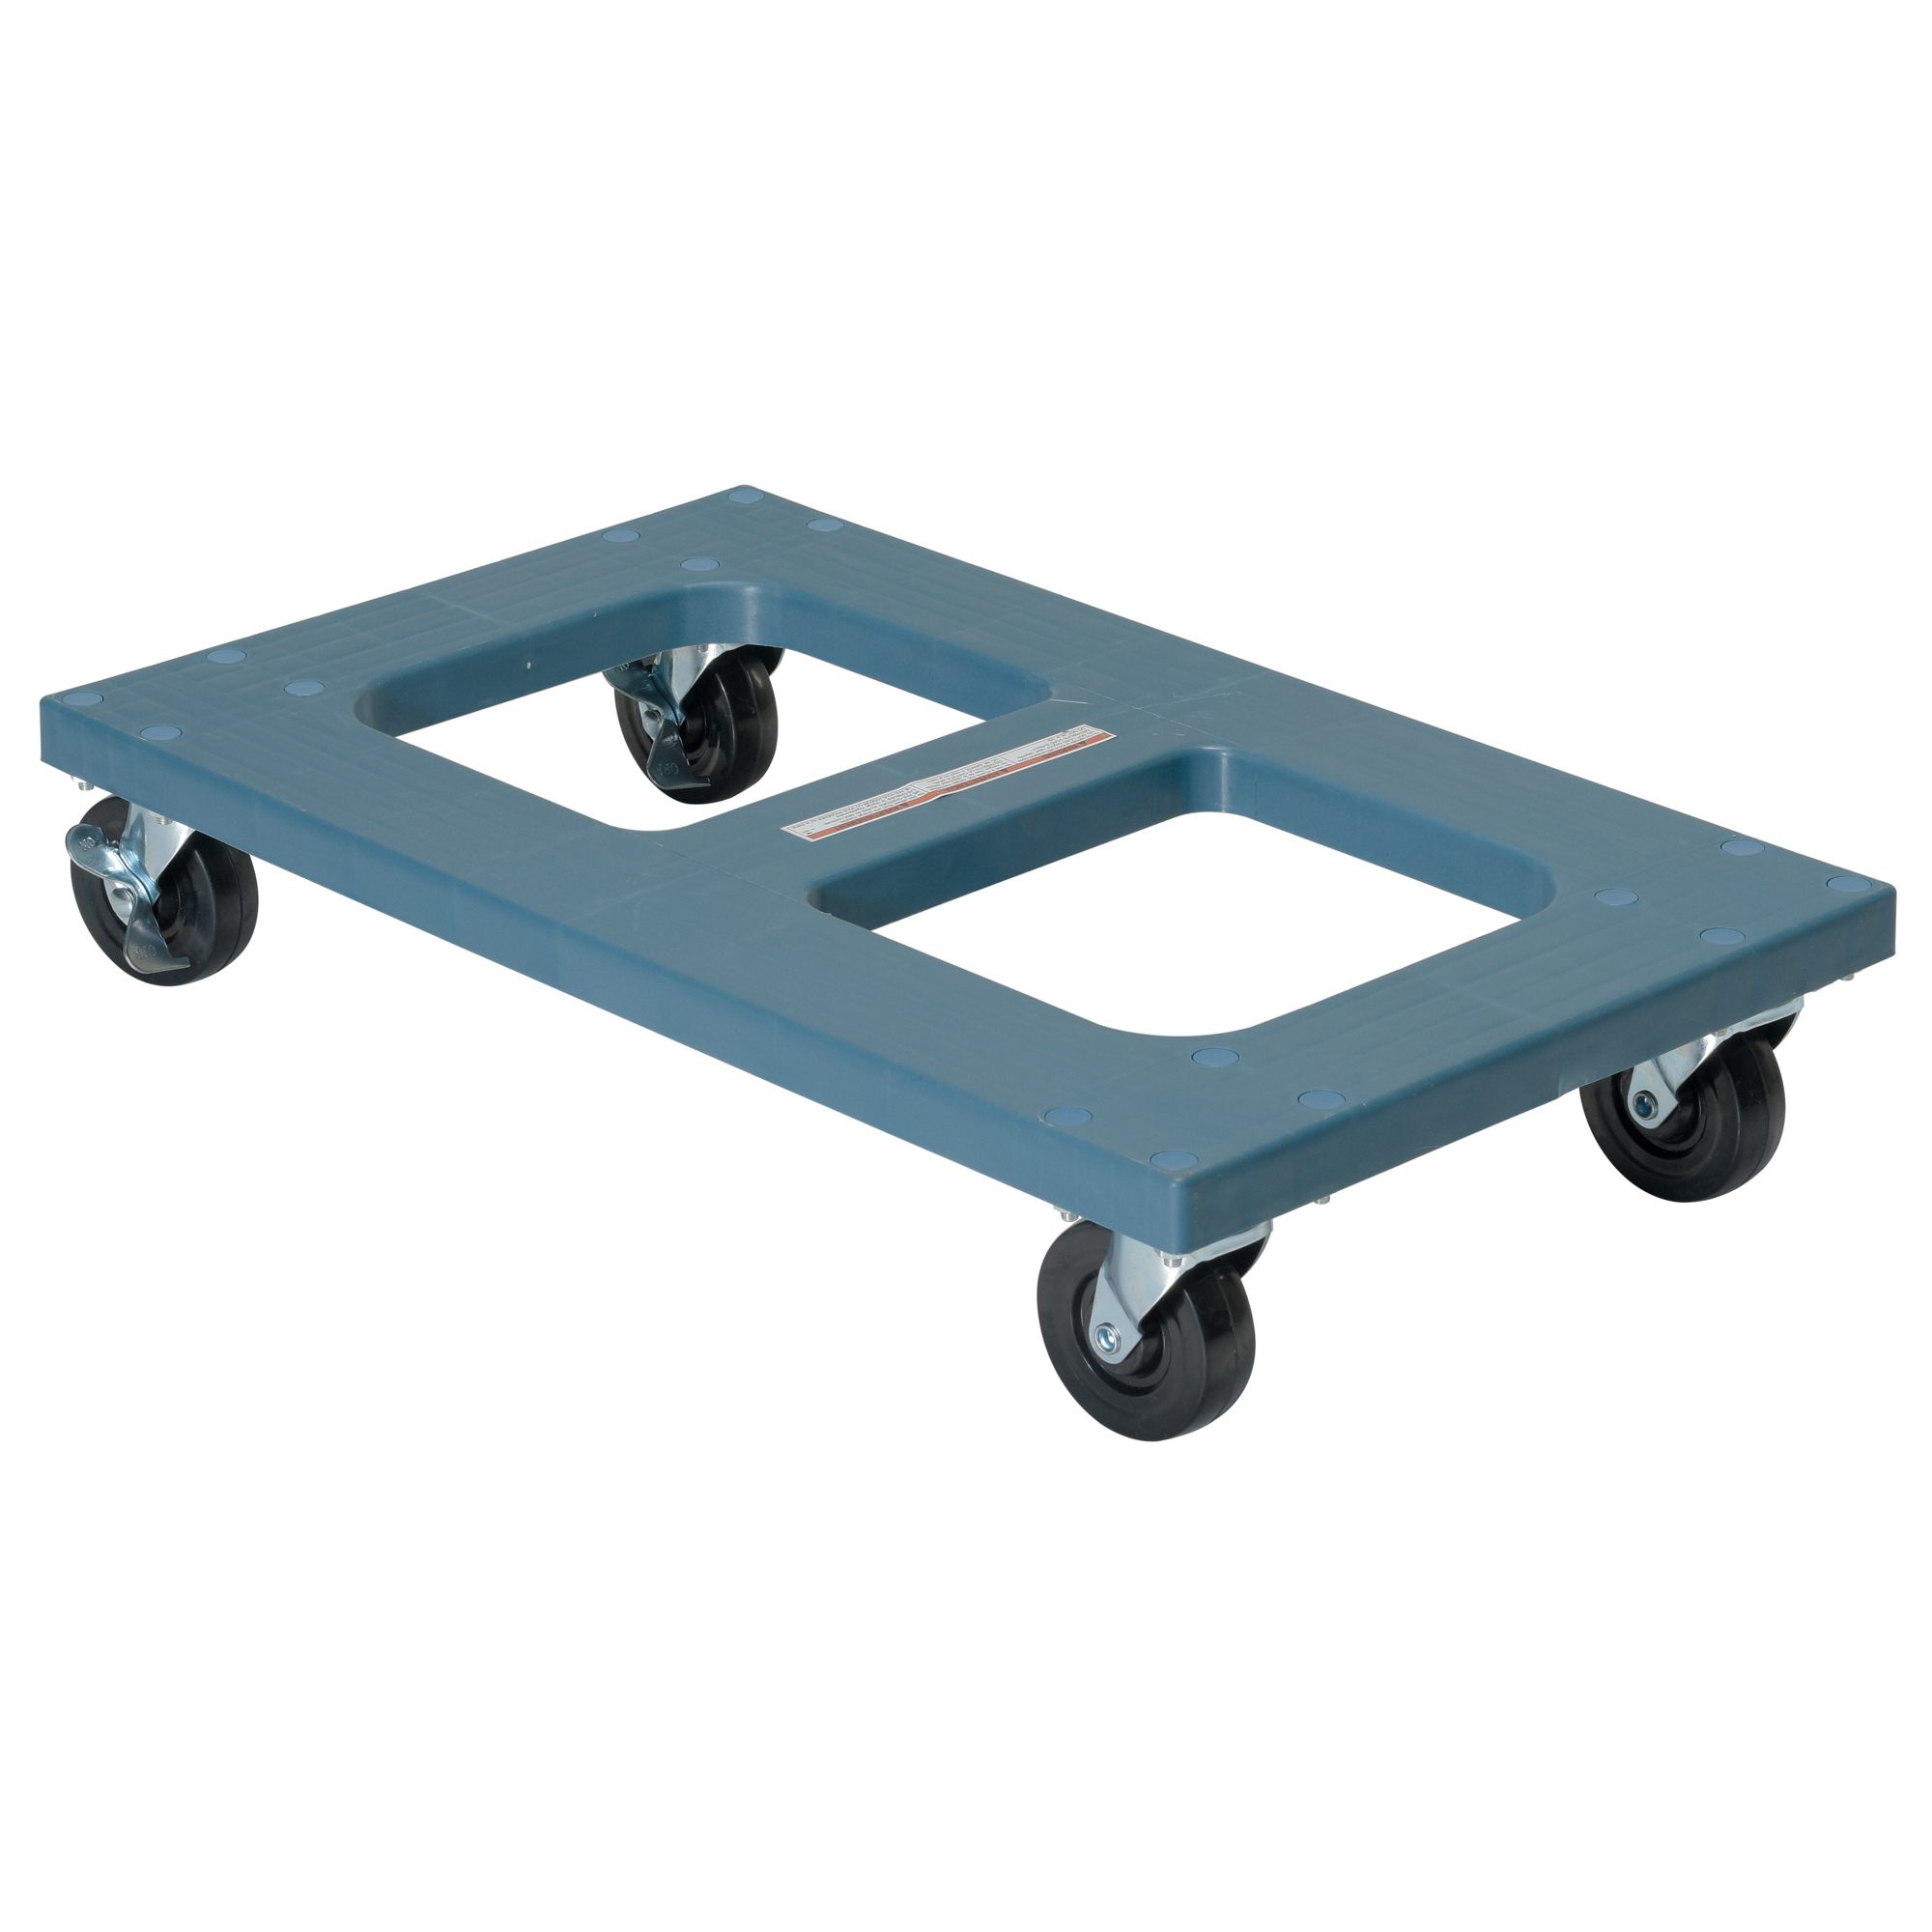 Strongway Hydraulic Furniture Mover Set - 3960-Lb. Capacity, 10Inch Lift